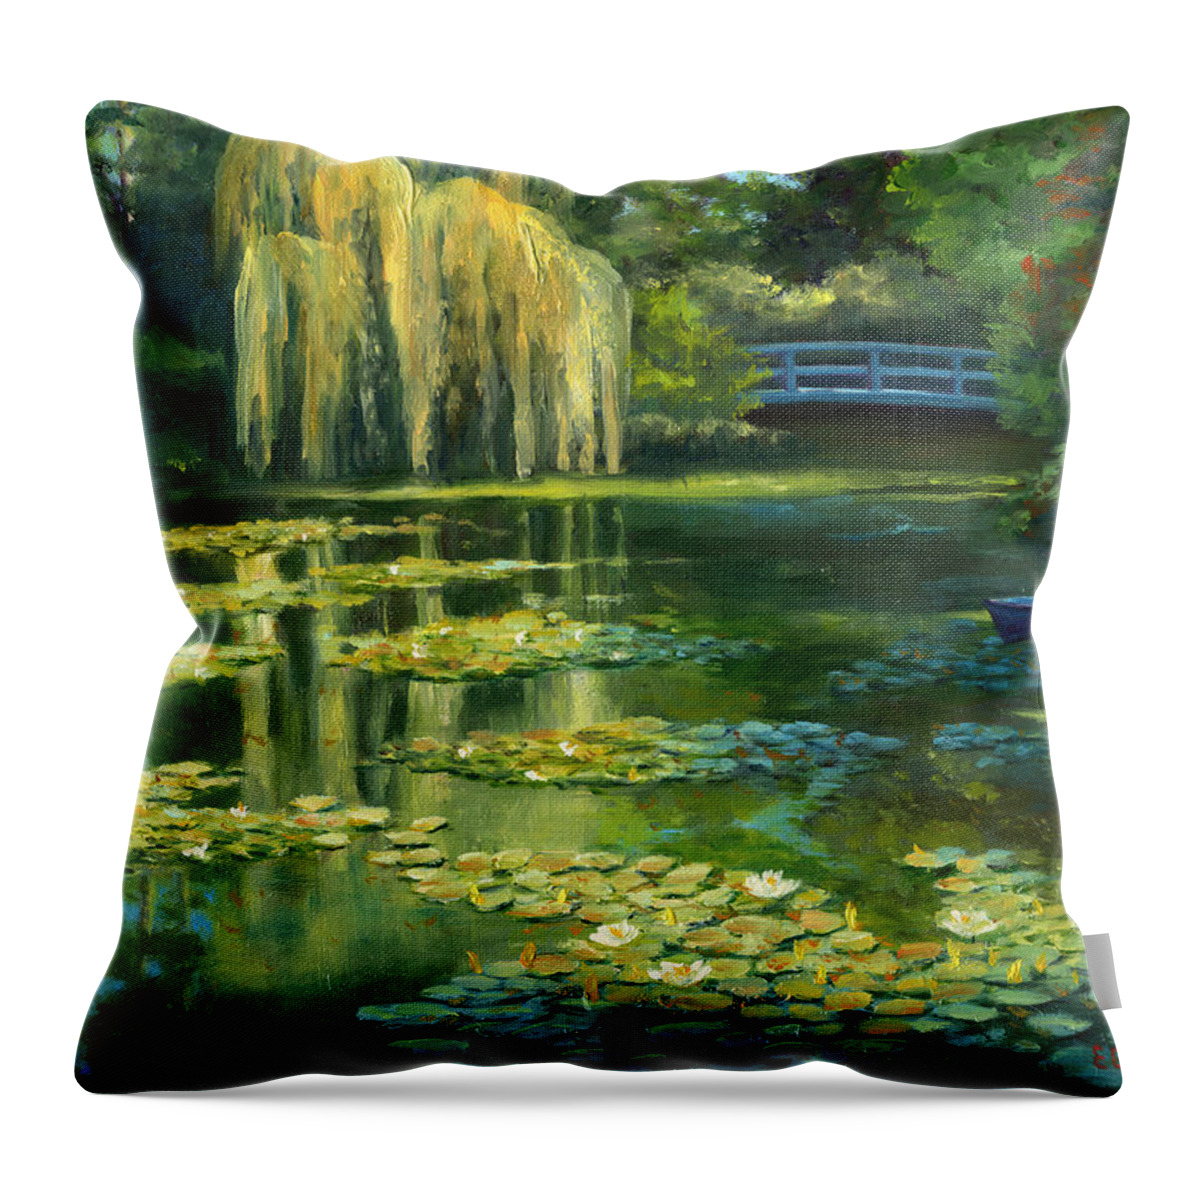 Monet Throw Pillow featuring the painting Monet Water Lily Garden III, Giverny, France by Elaine Farmer